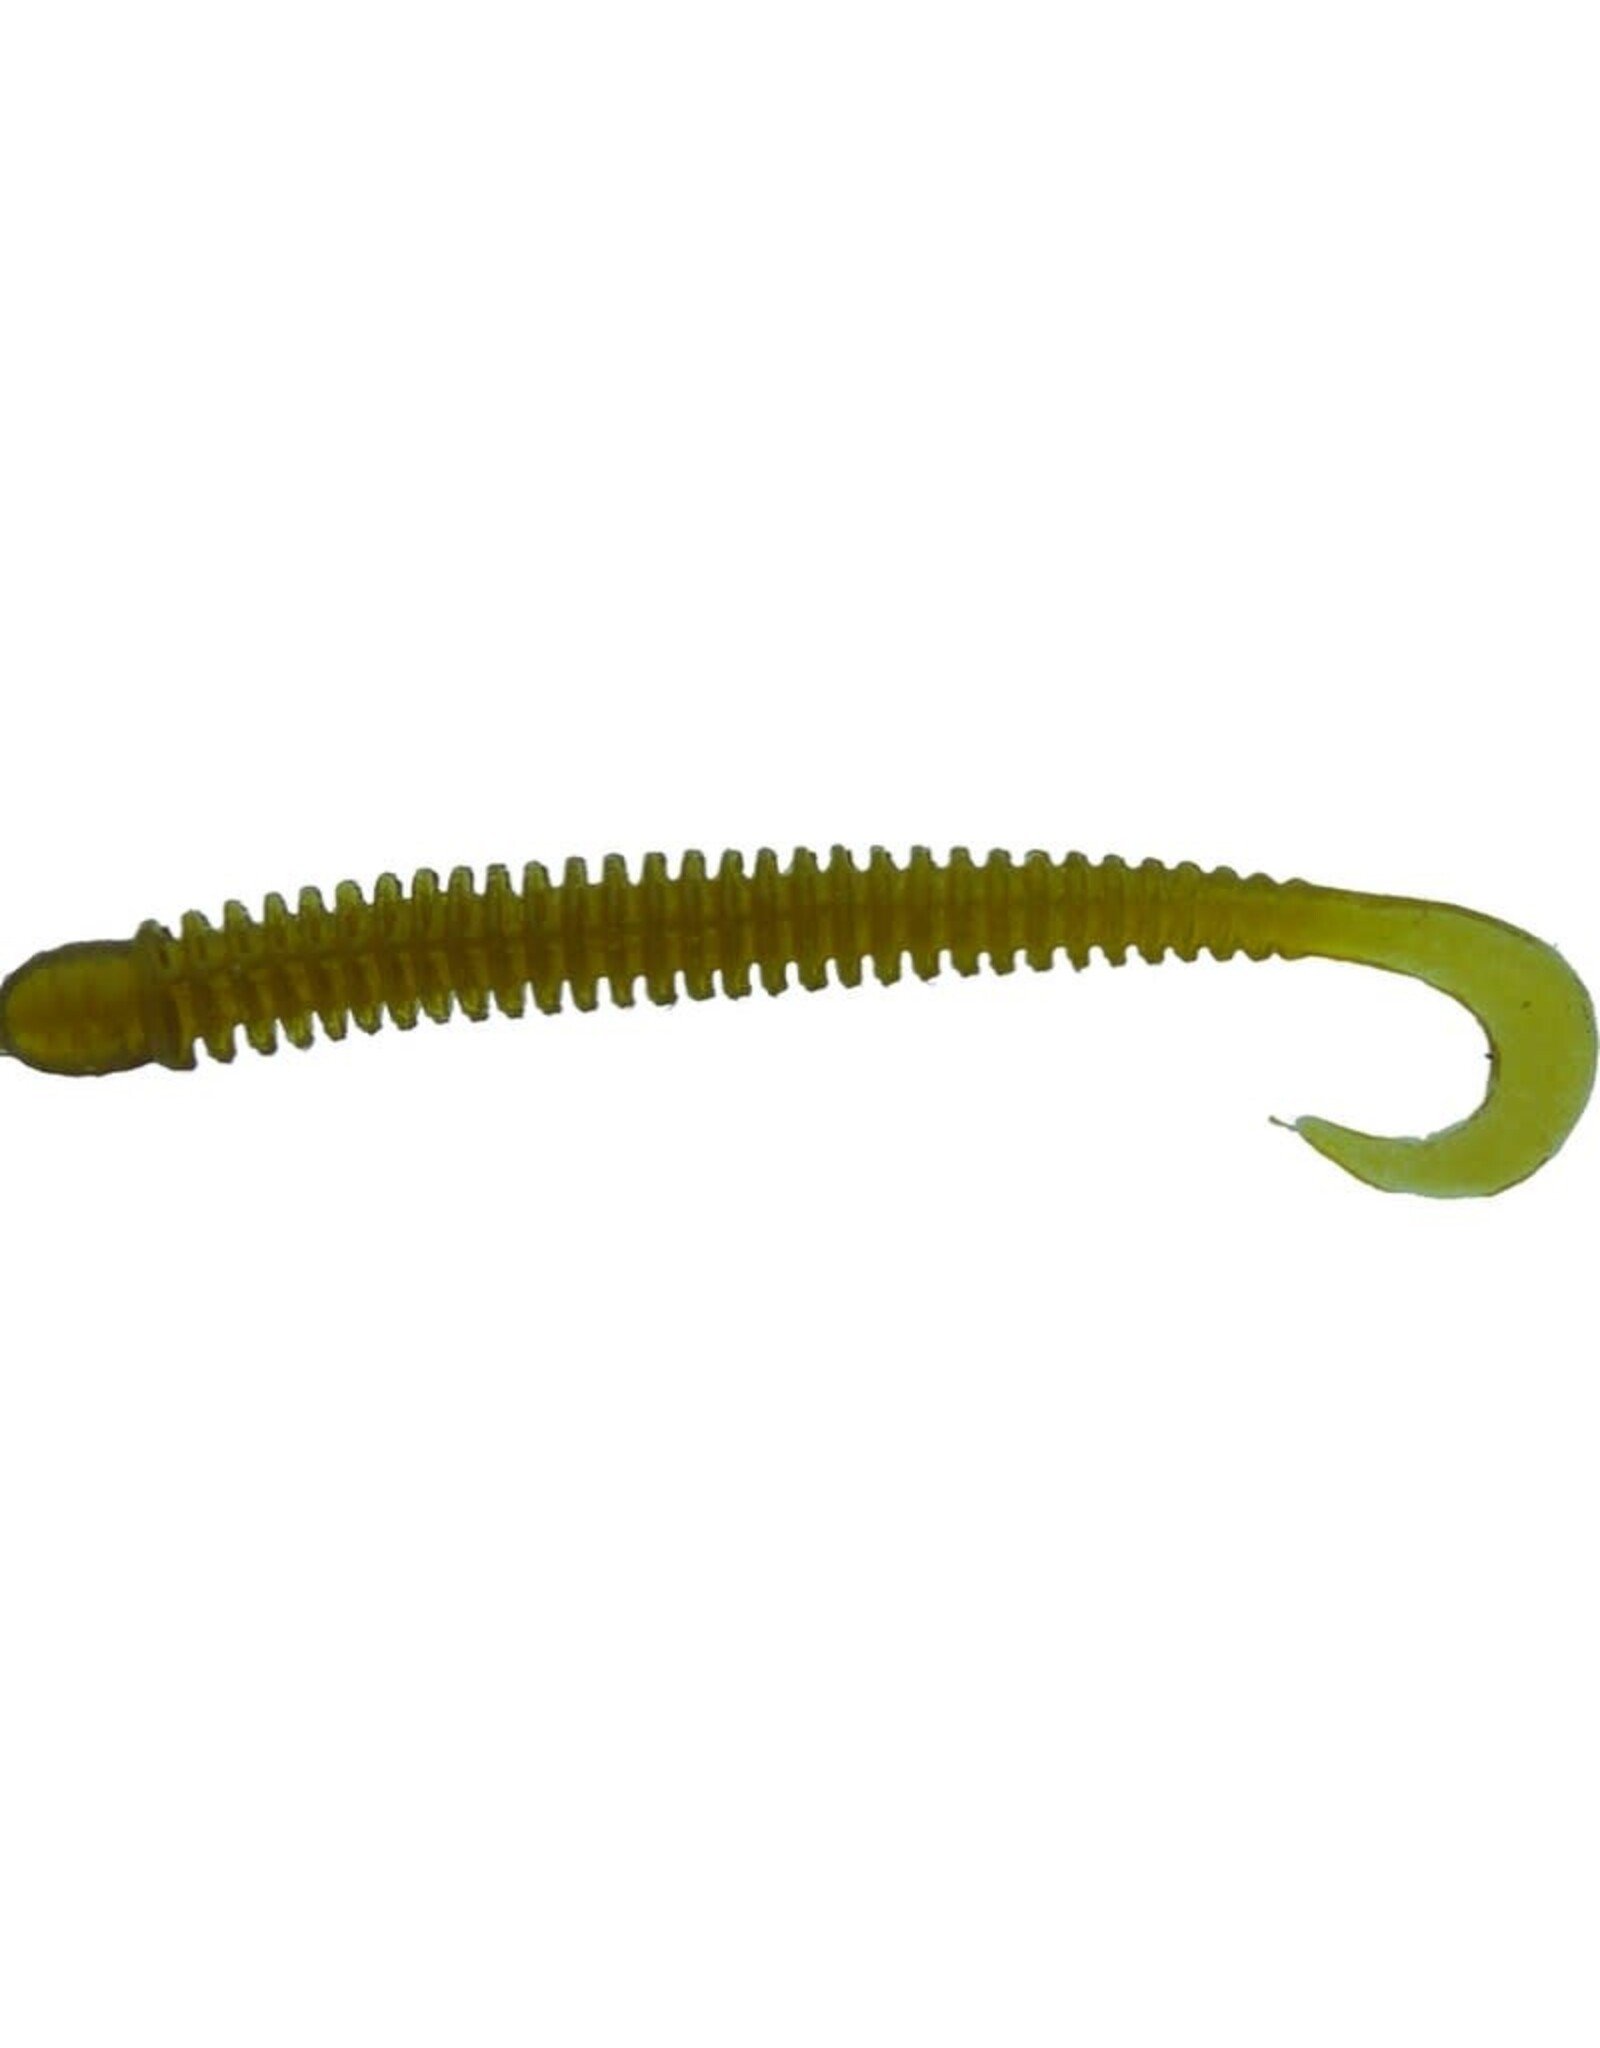 Dry Creek Jerry's 4" Saturn Worm - Old Ugly - 10 Count